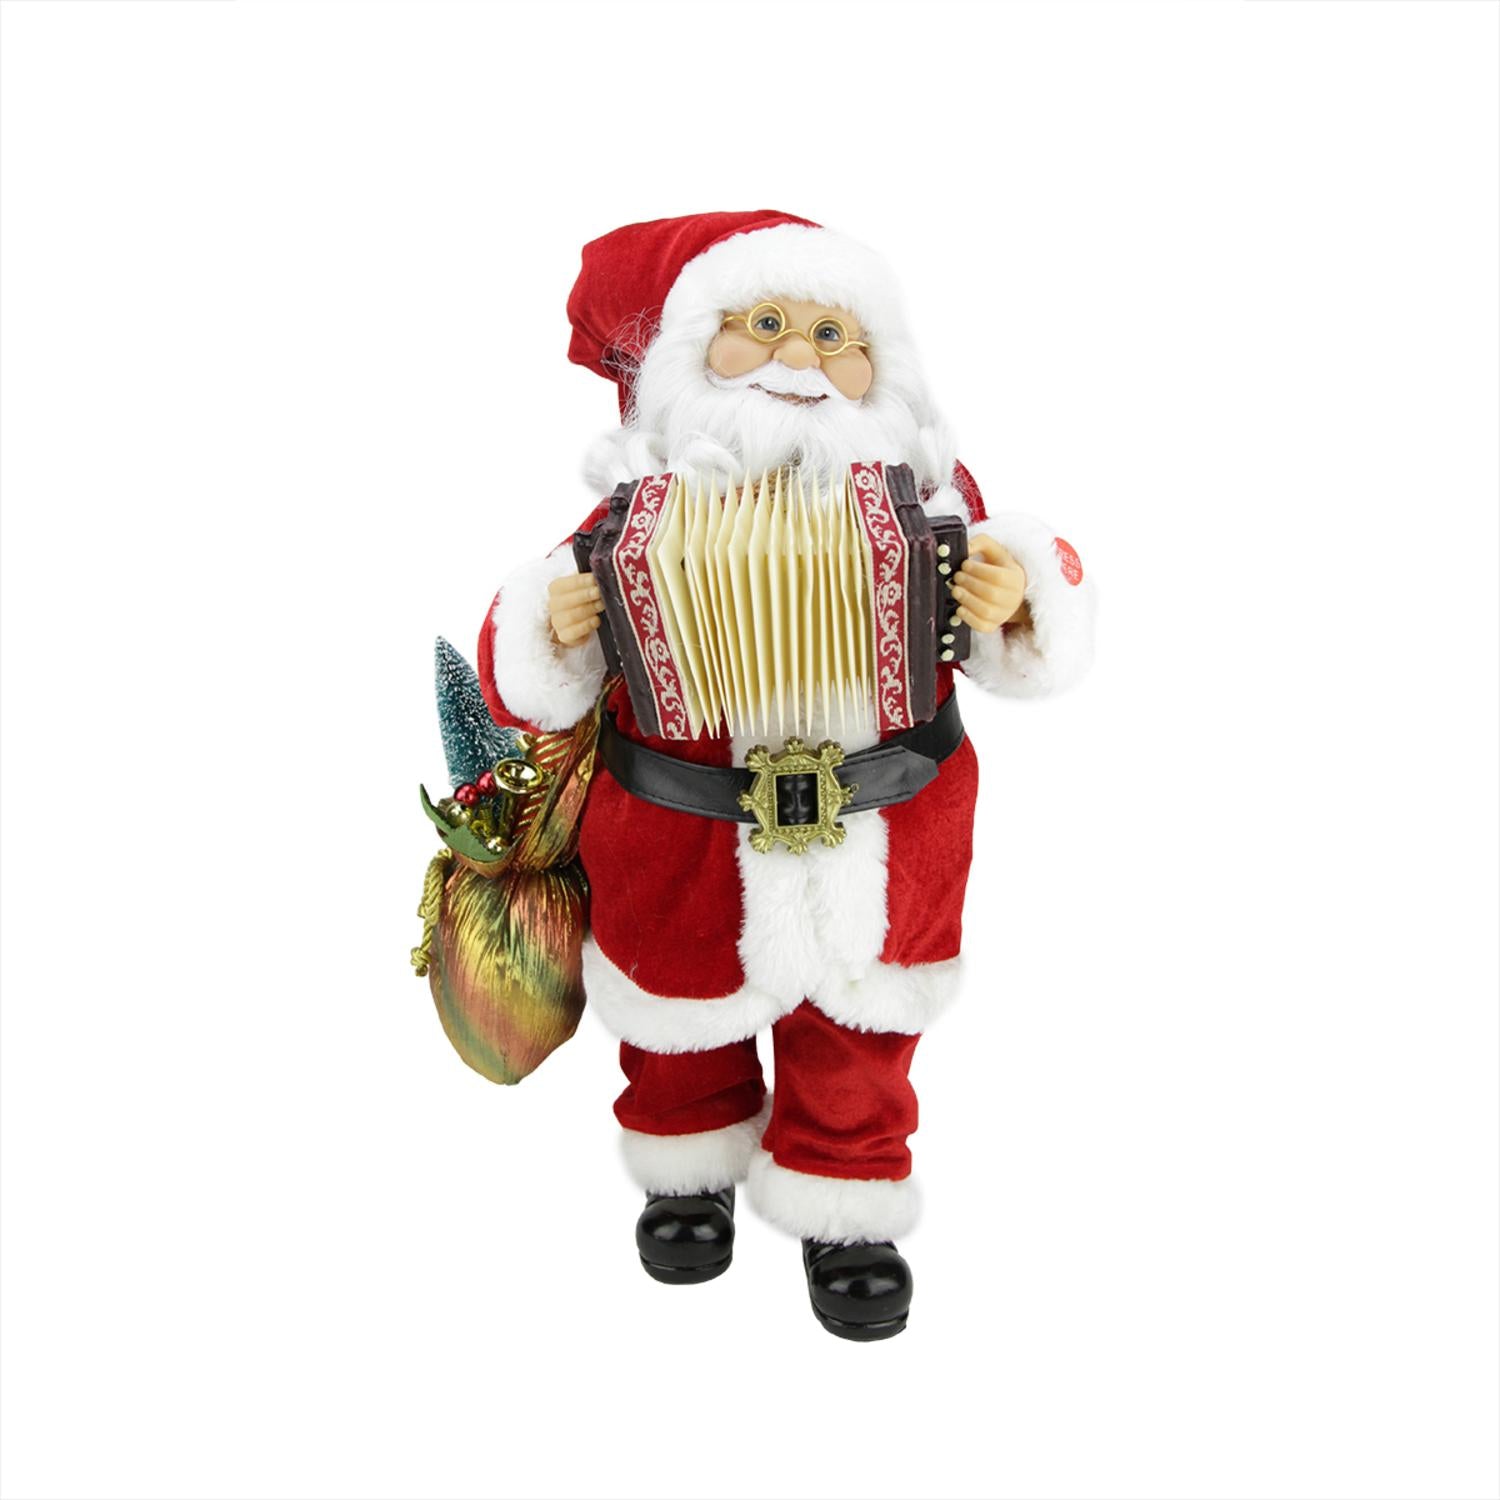 18" Battery Operated Animated & Musical Standing Santa Claus Christmas Figure with Accordion